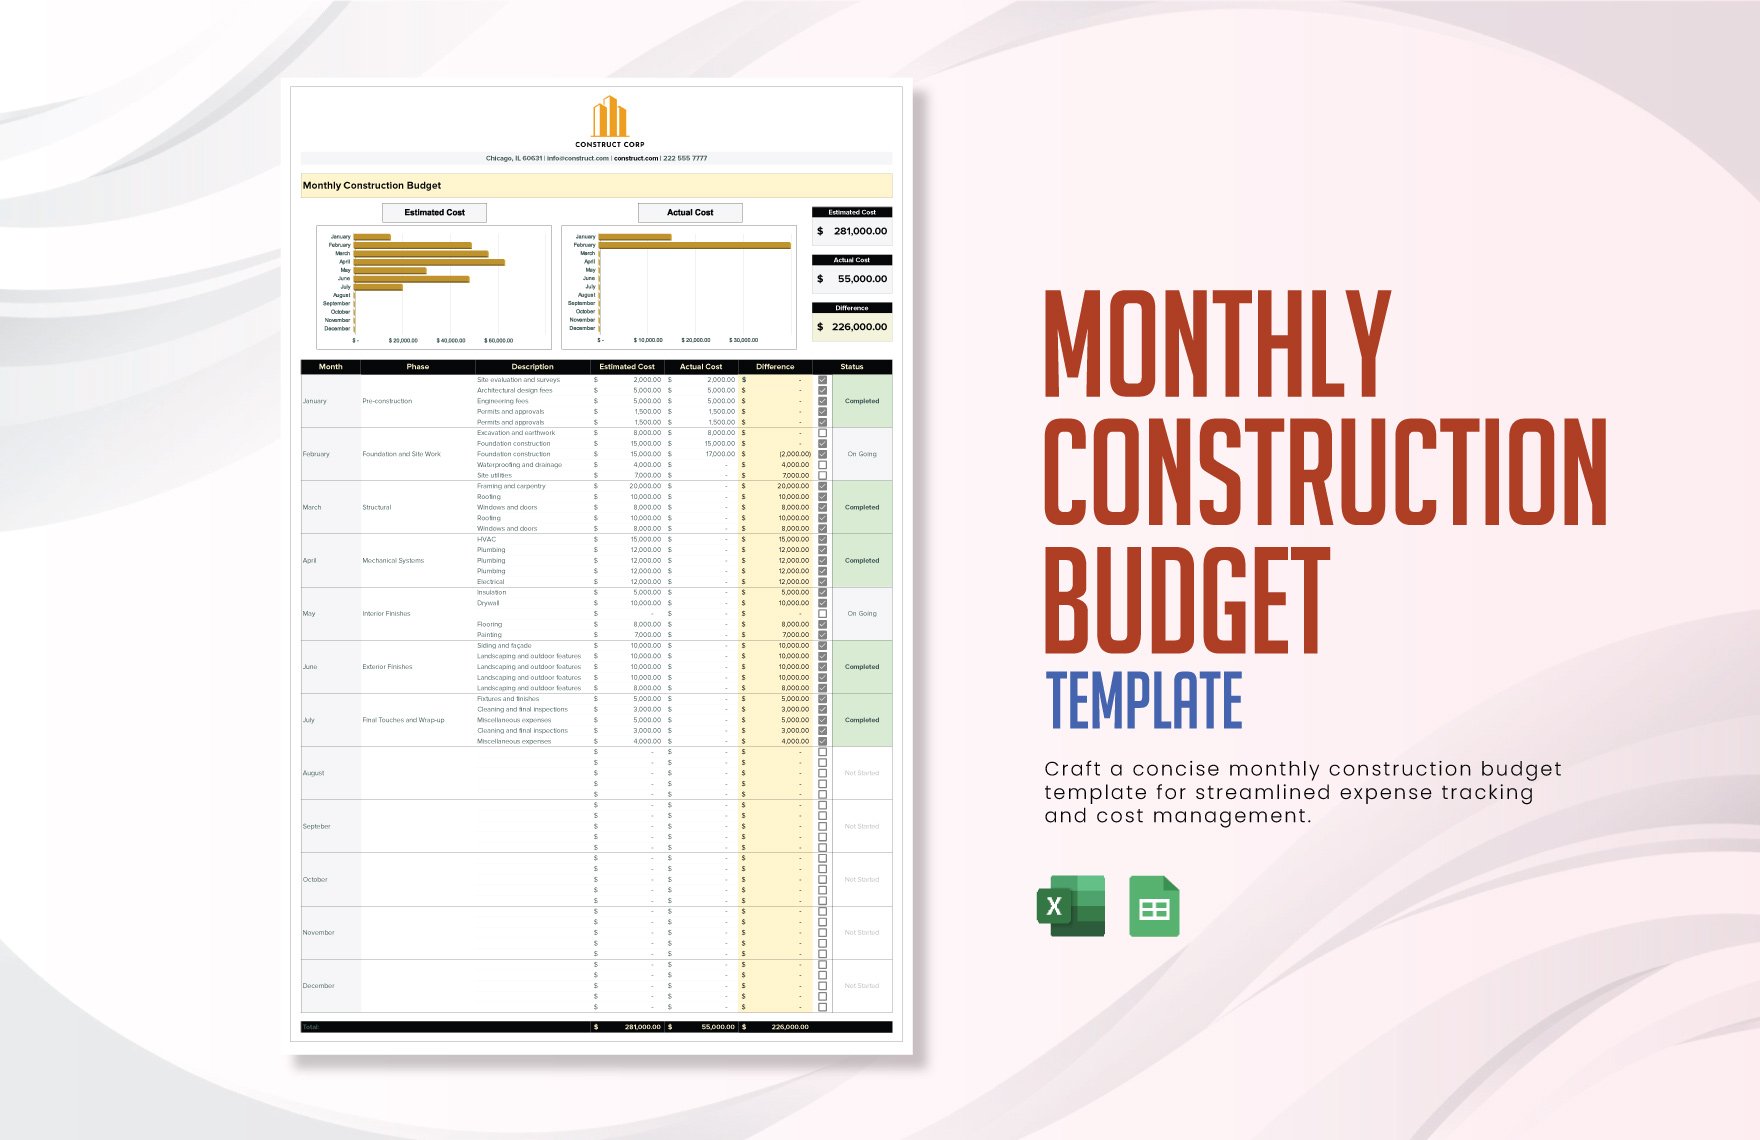 Monthly Construction Budget Template in Excel, Google Sheets